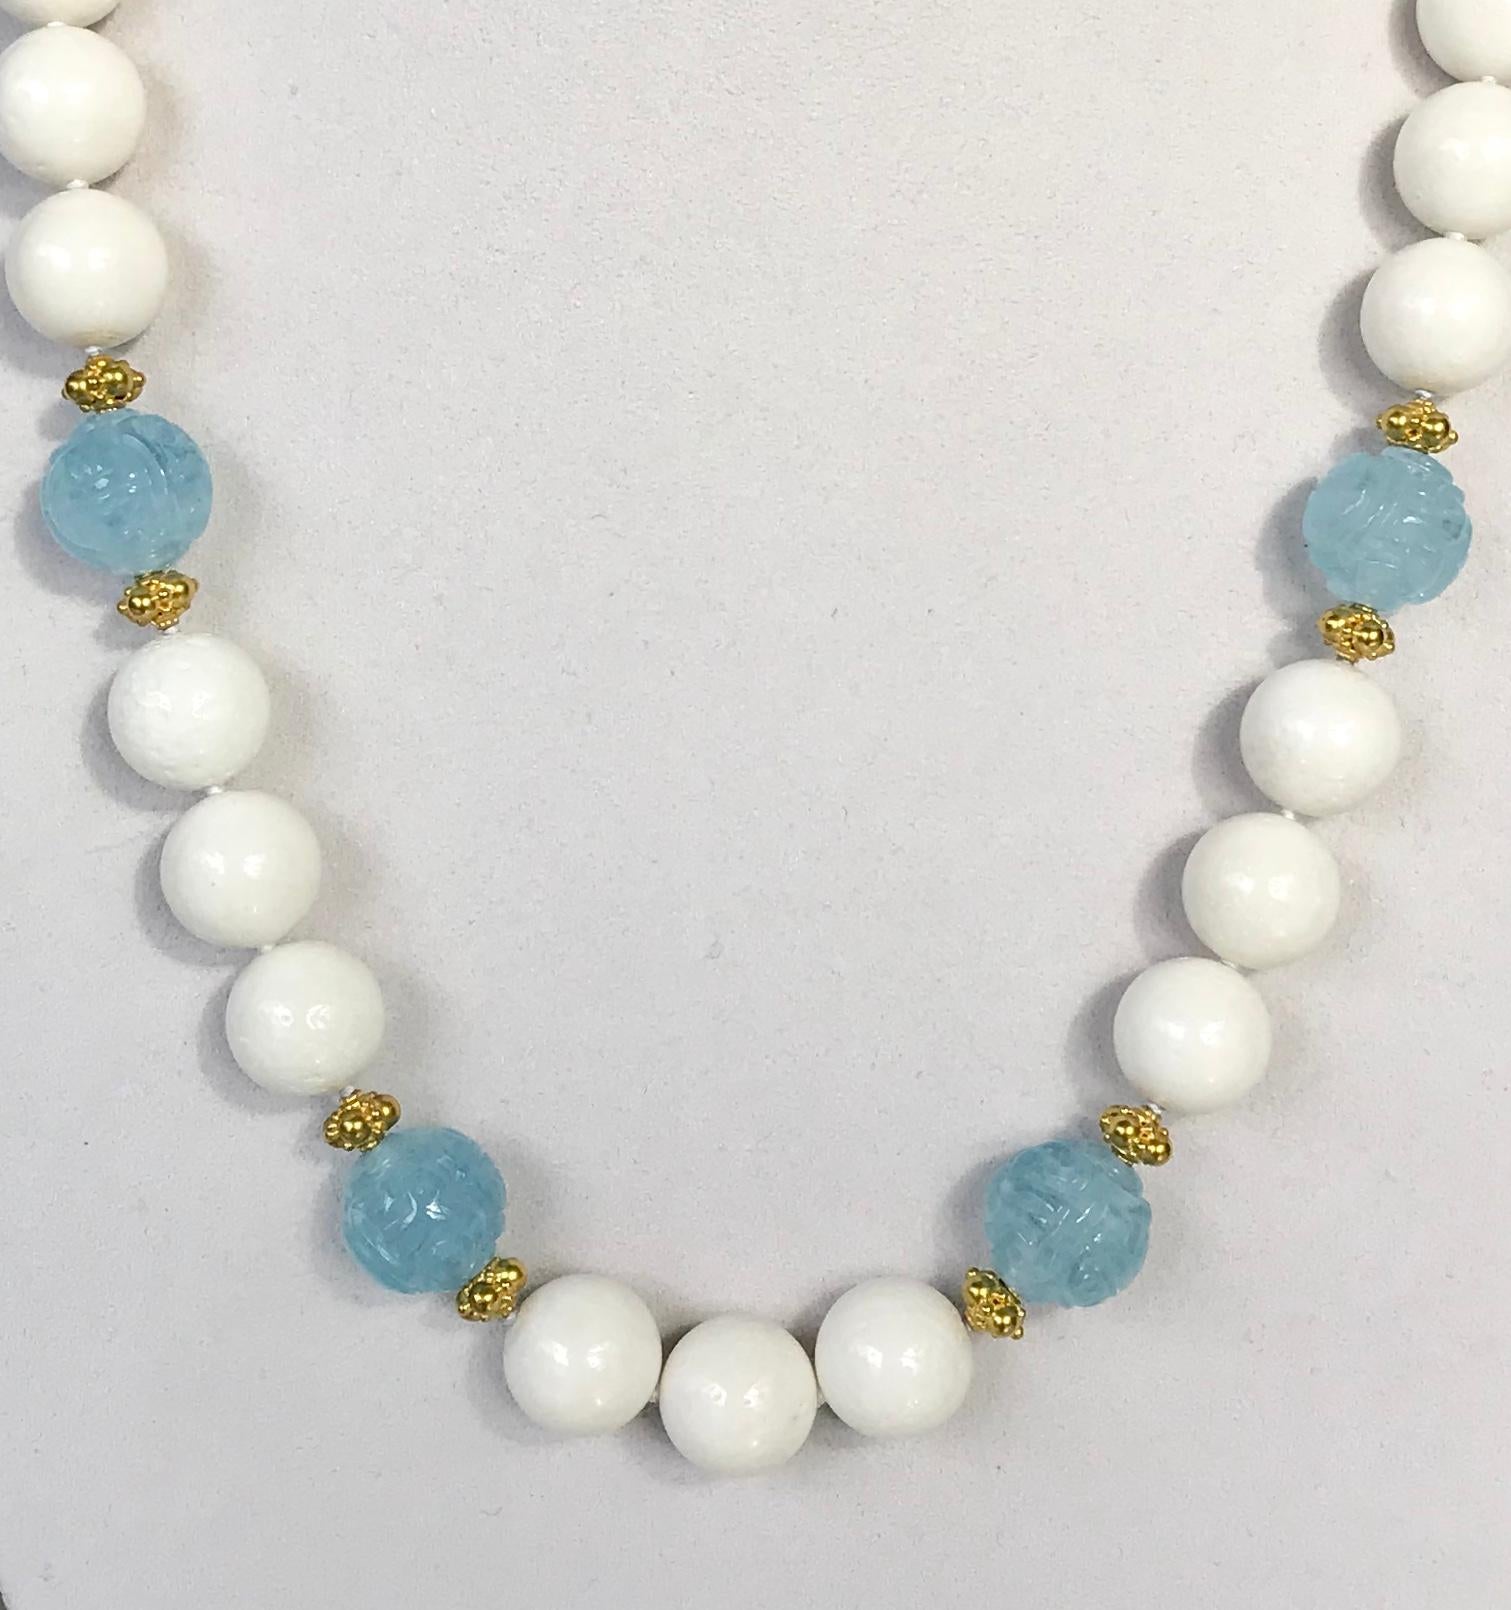 One-of-a-kind white coral beaded necklace accented with four carved aquamarine beads and eight 18 karat gold spacers and gold clasp.

A beautiful white coral beaded necklace interlaced with carved aquamarines and gold spacers, this refreshing